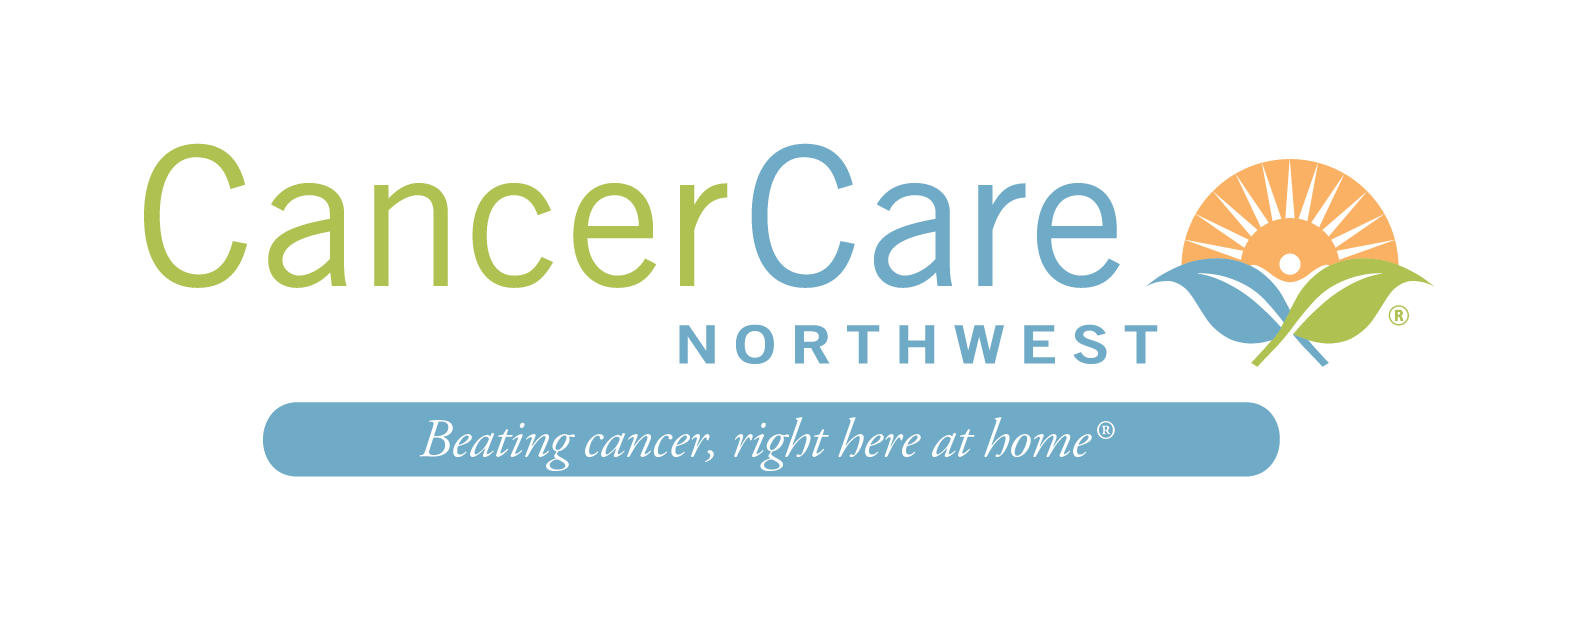 Cancer Care Northwest: Beating Cancer Right Here at Home